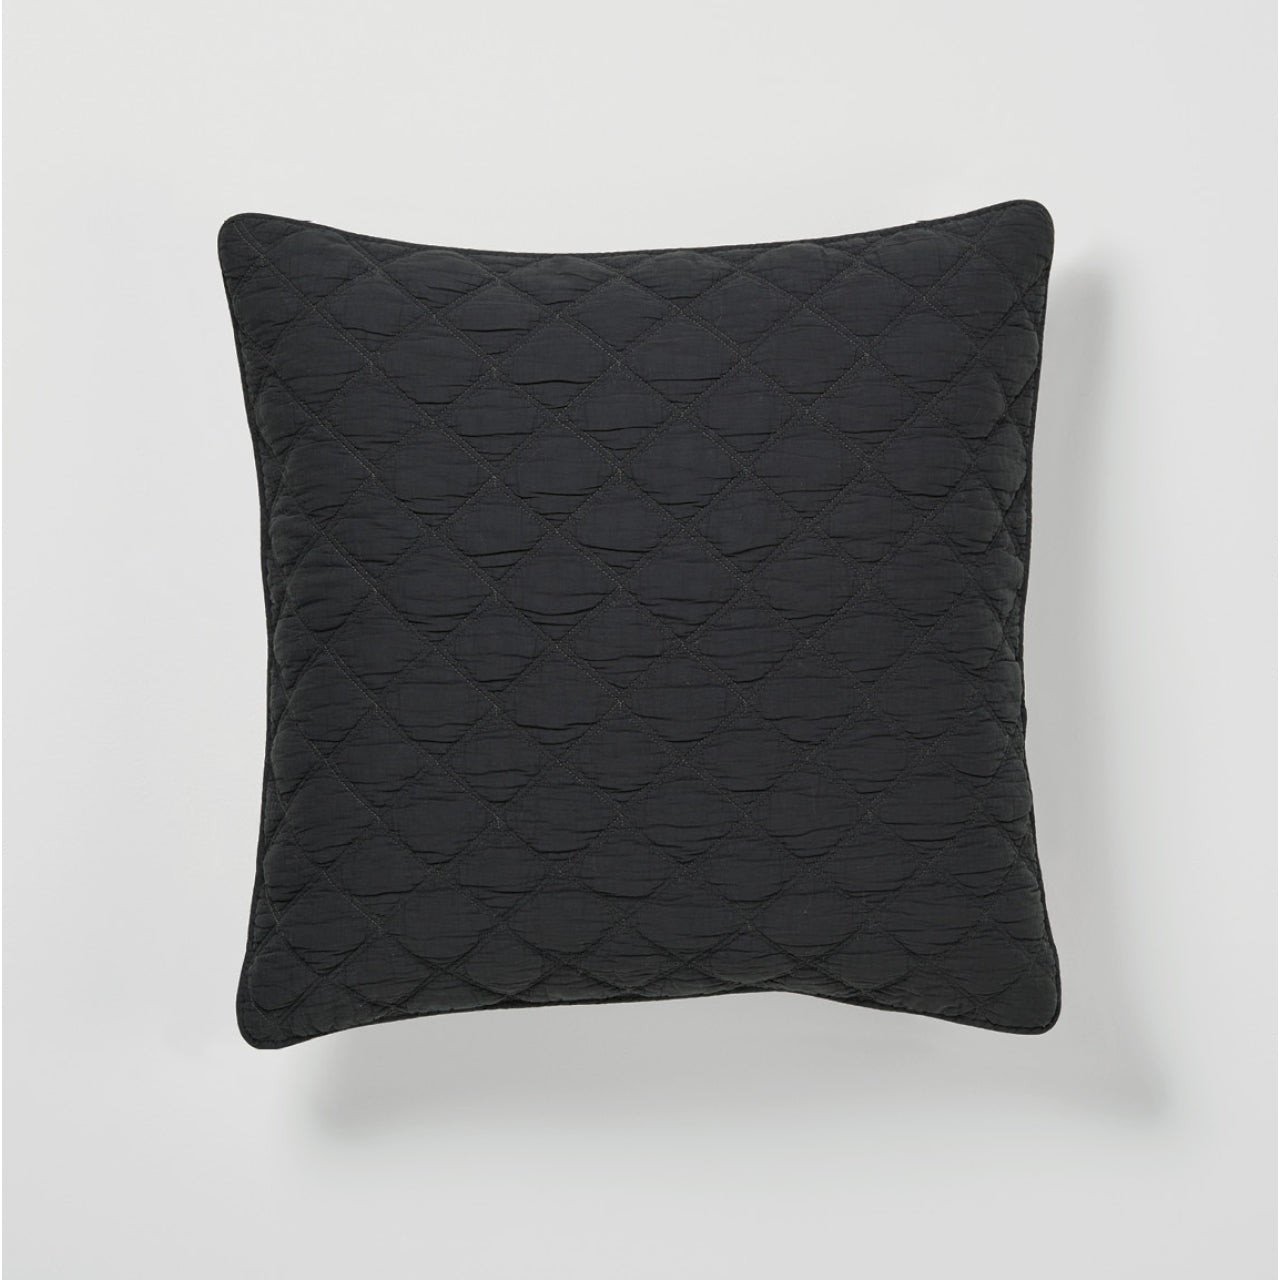 Austin Charcoal Cushion Cover on a white background